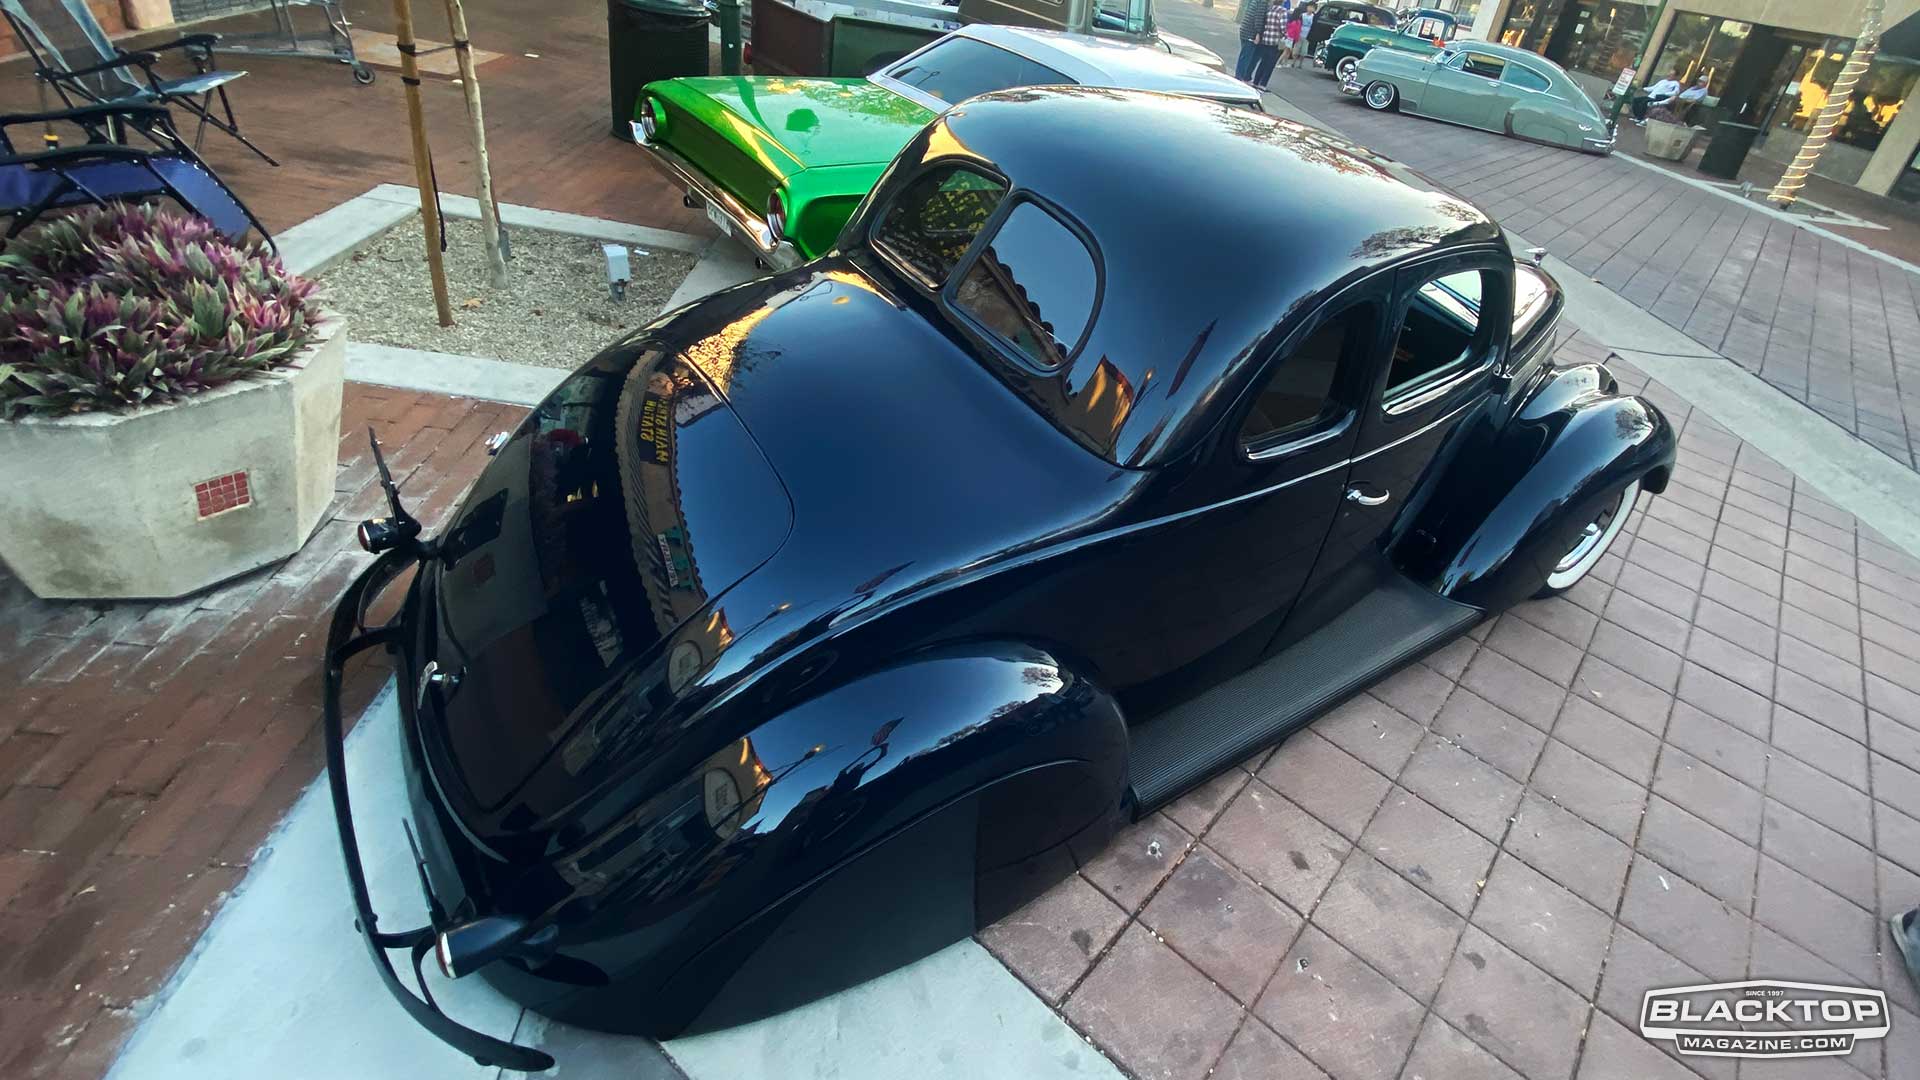 Kevin's '37 Ford Coupe